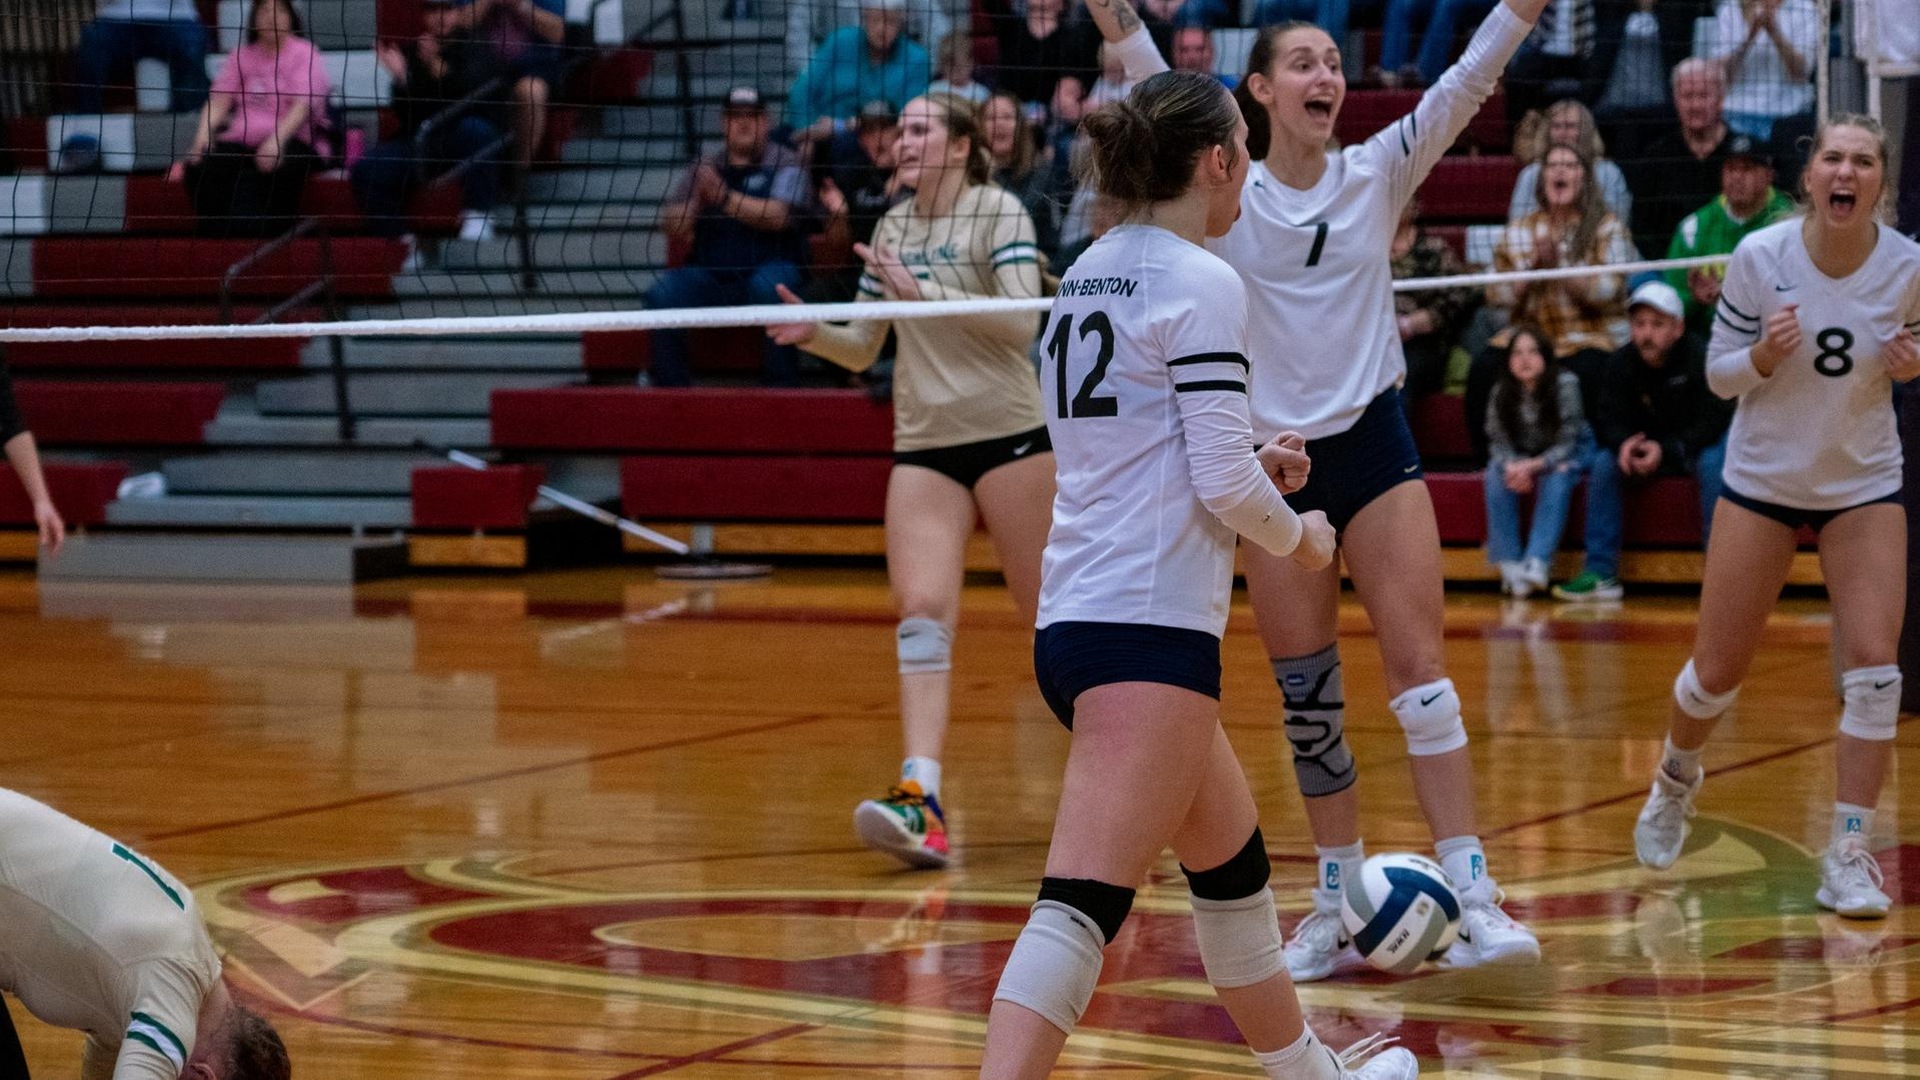 The Roadrunners will take on North Idaho for the NWAC Volleyball Championship [PHOTO: Sarah Rose Larson]